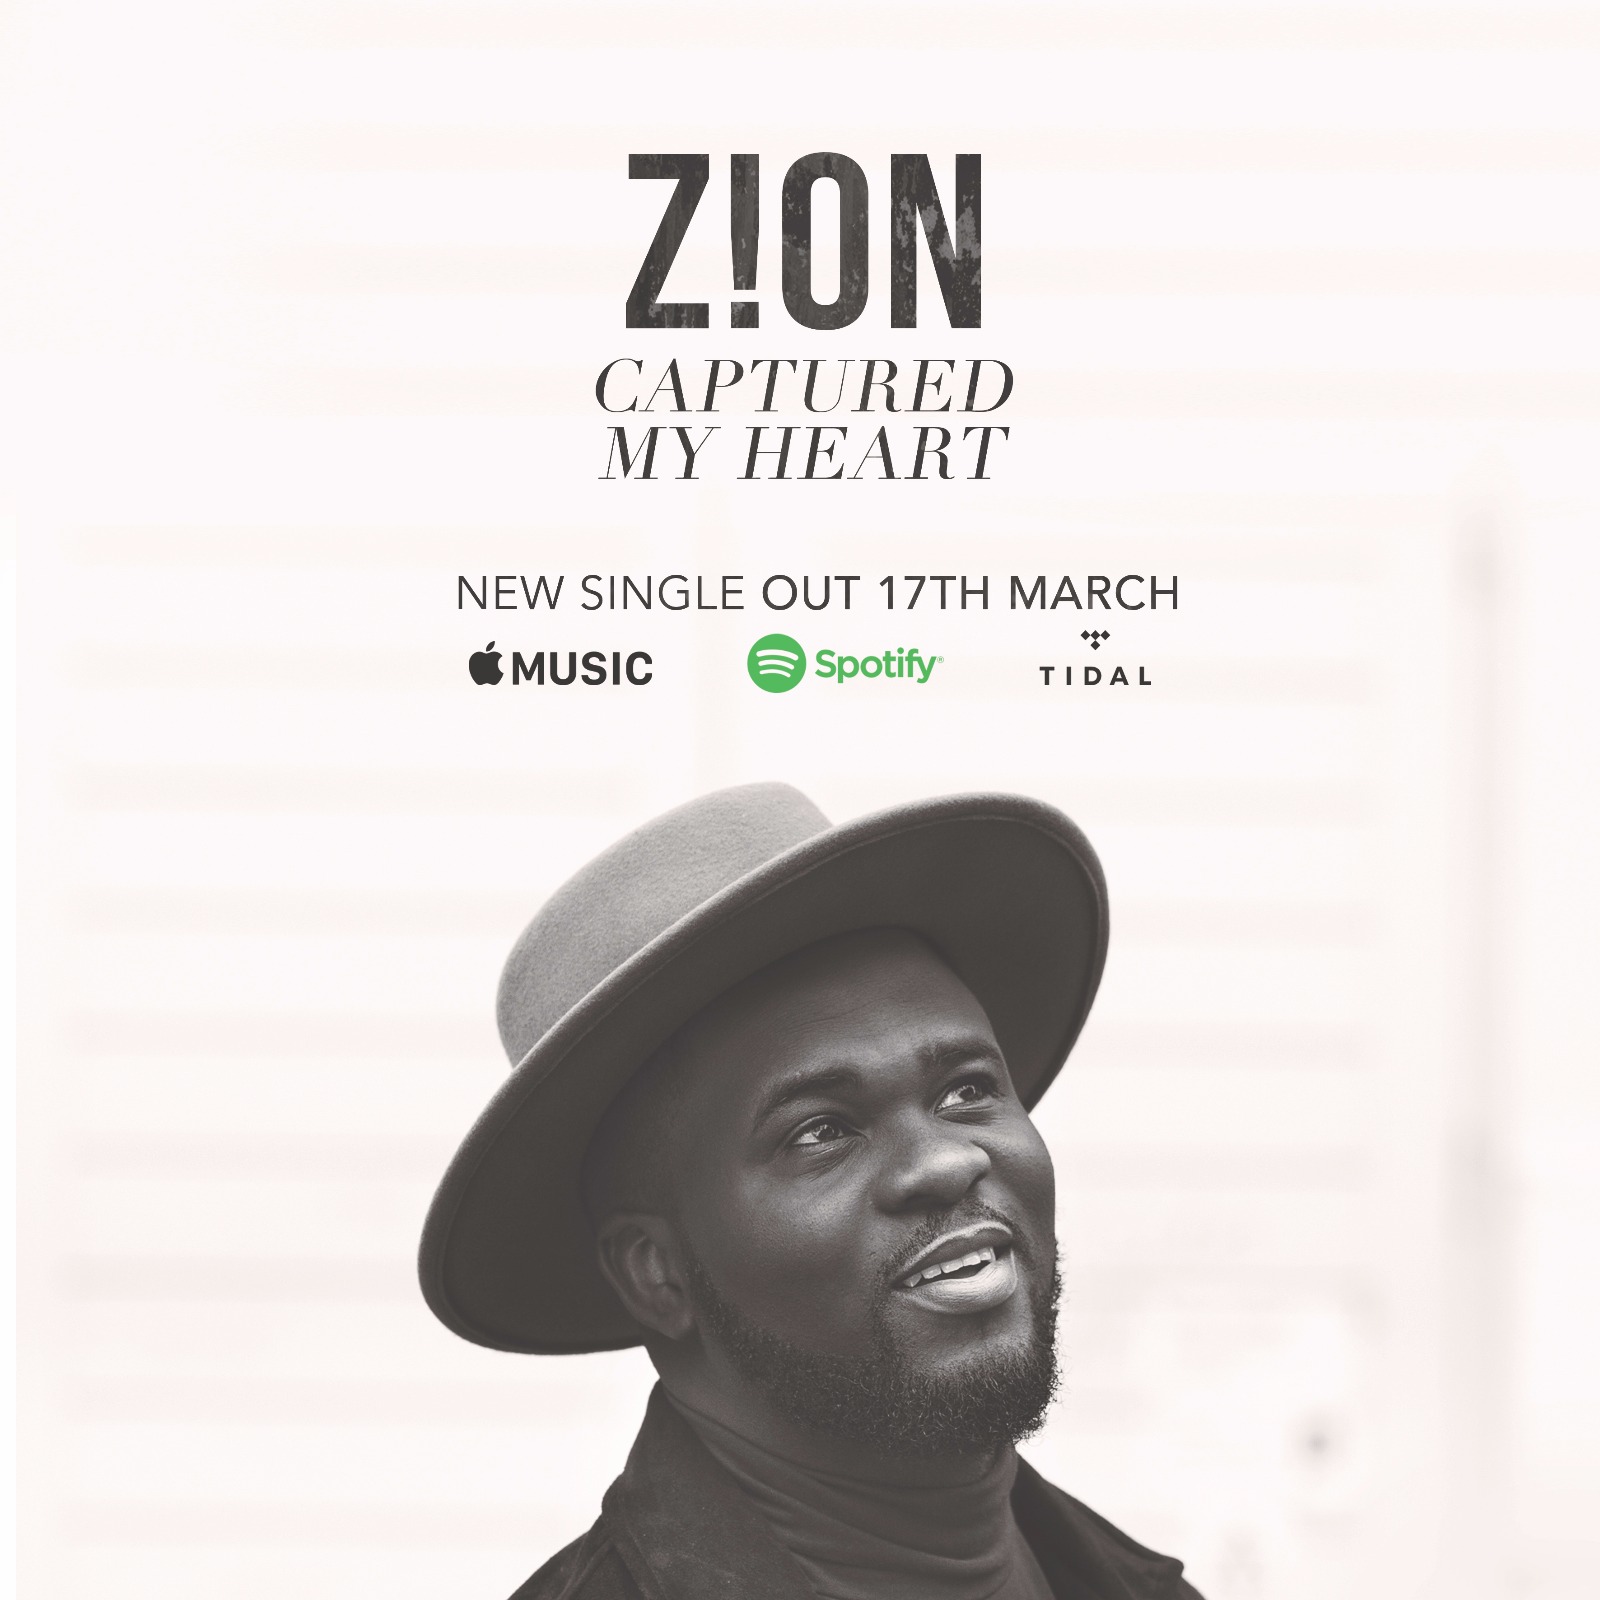 BBC Introducing Artist Zion Announces New Single 'Captured My Heart'